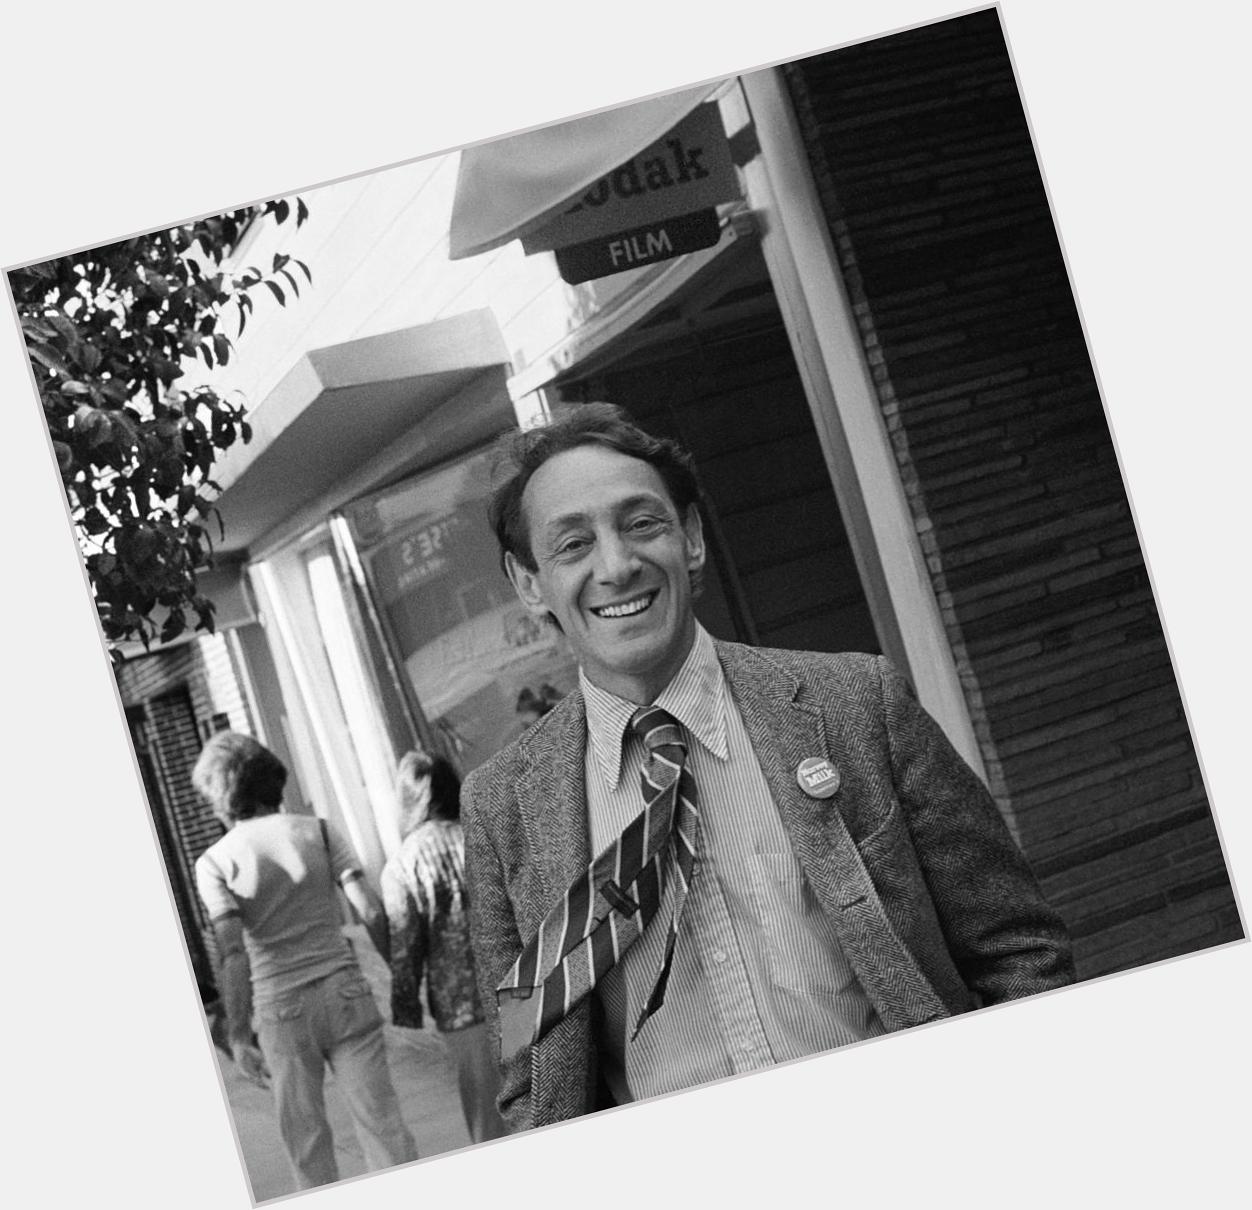 No Harvey Milk = no me having an easier time being accepted and elected.

Happy Birthday, Harvey. 